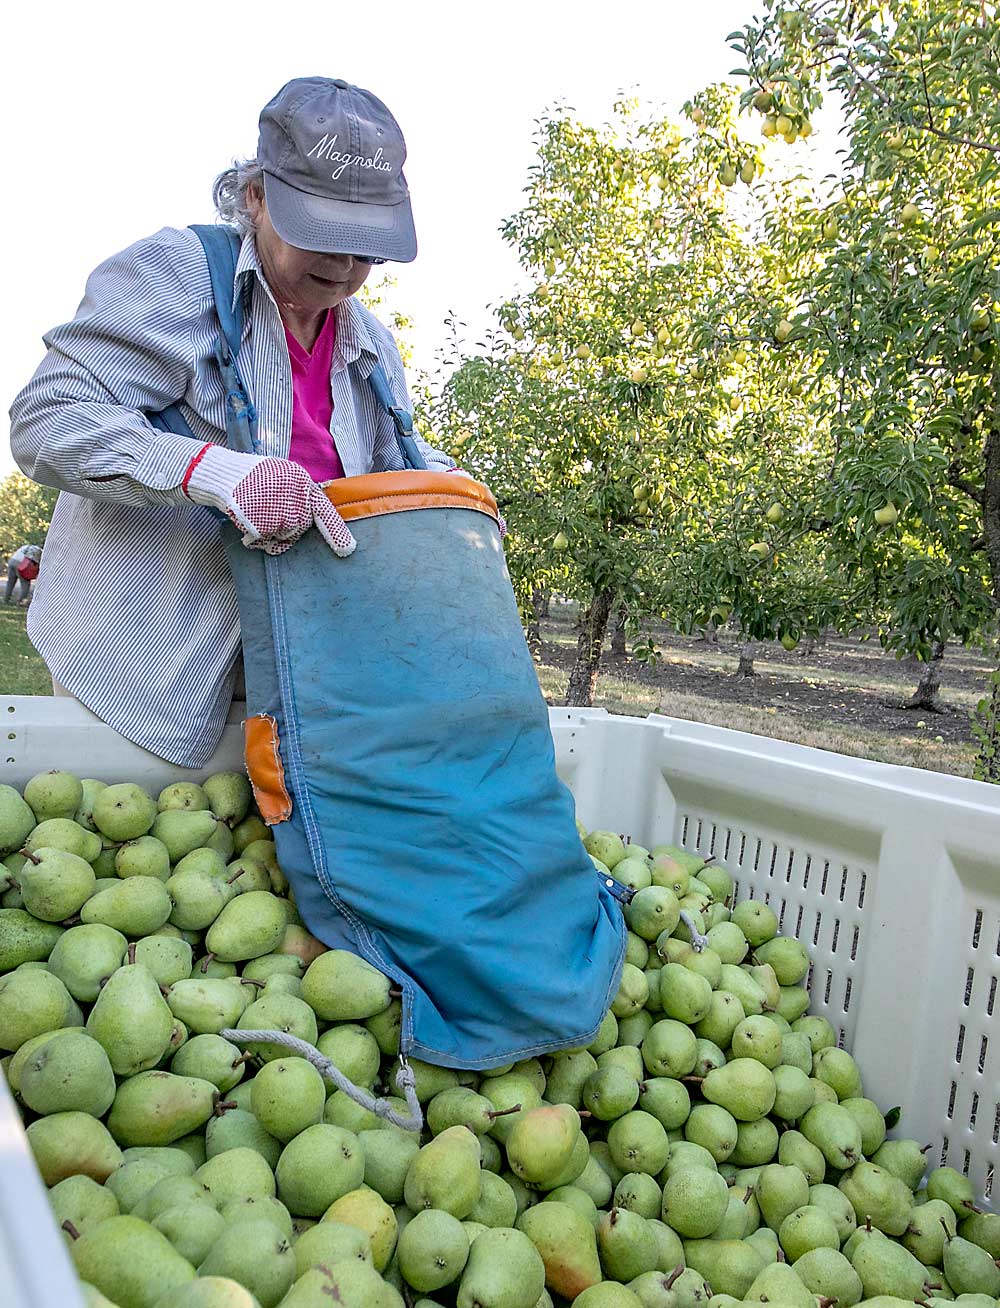 Mary Sue Stouder empties her bag of Bartletts into a container destined for the church cannery in Caldwell, Idaho.  The Medford farm produces about 2 million pounds of pears each year.  (TJ Mullinax/Good Fruit Grower)